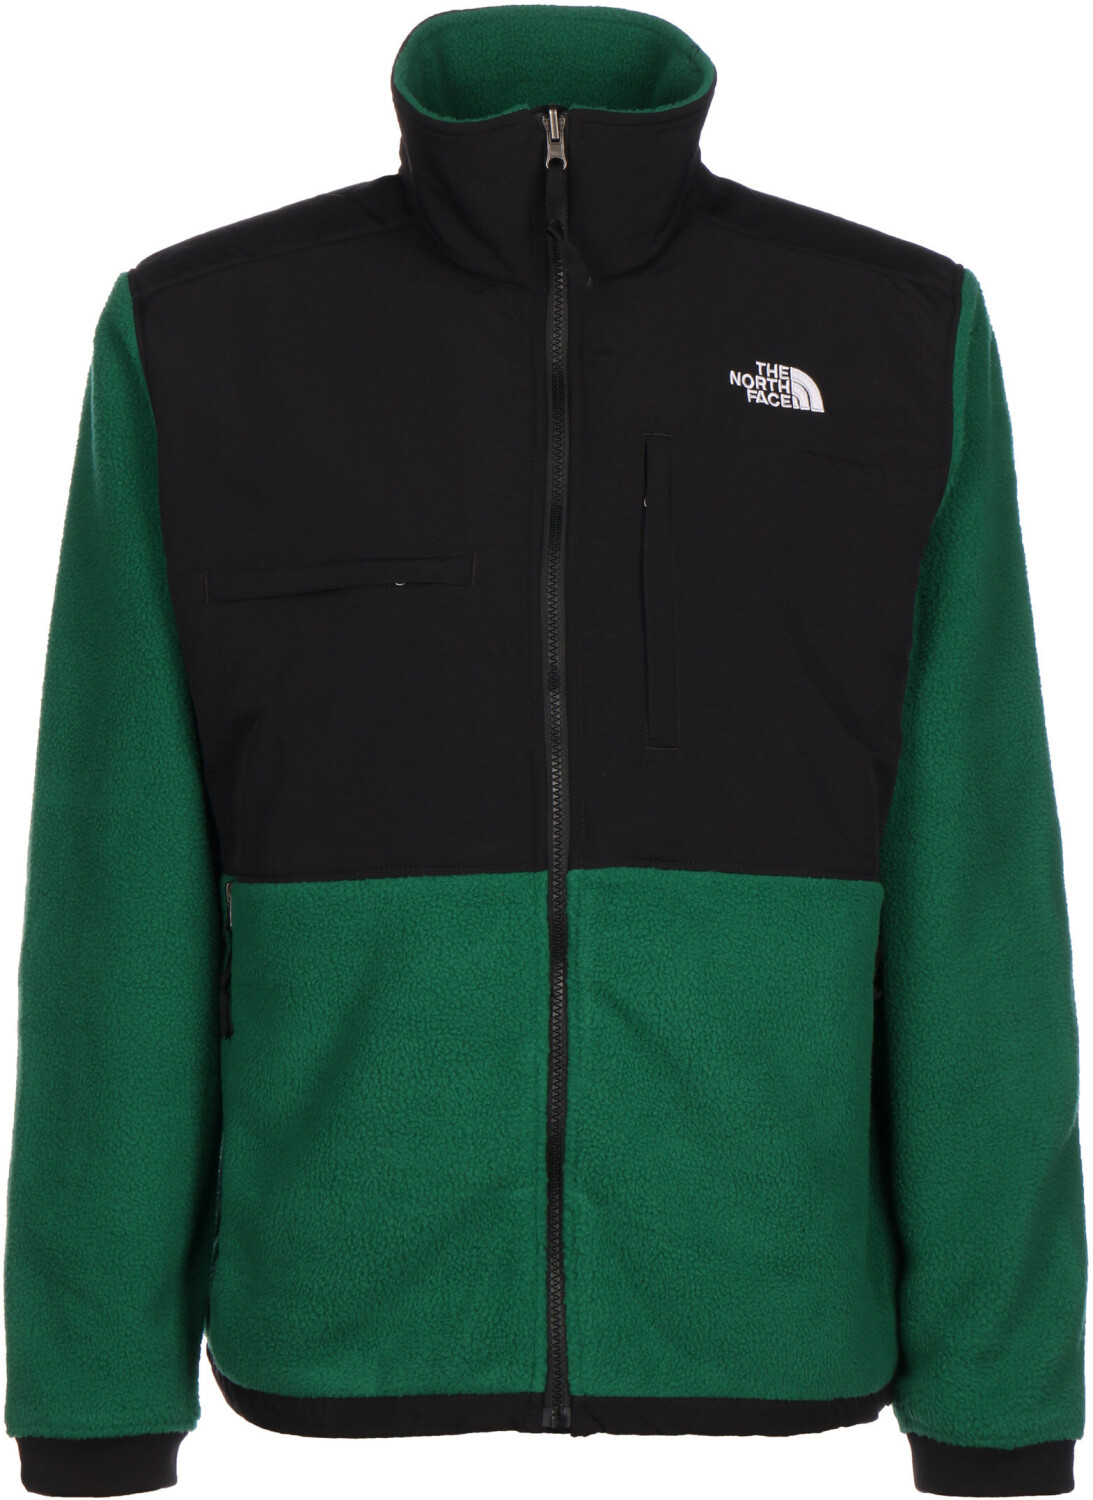 Buy The North Face Men's Denali 2 Jacket (4QYJ) from £134.99 (Today ...